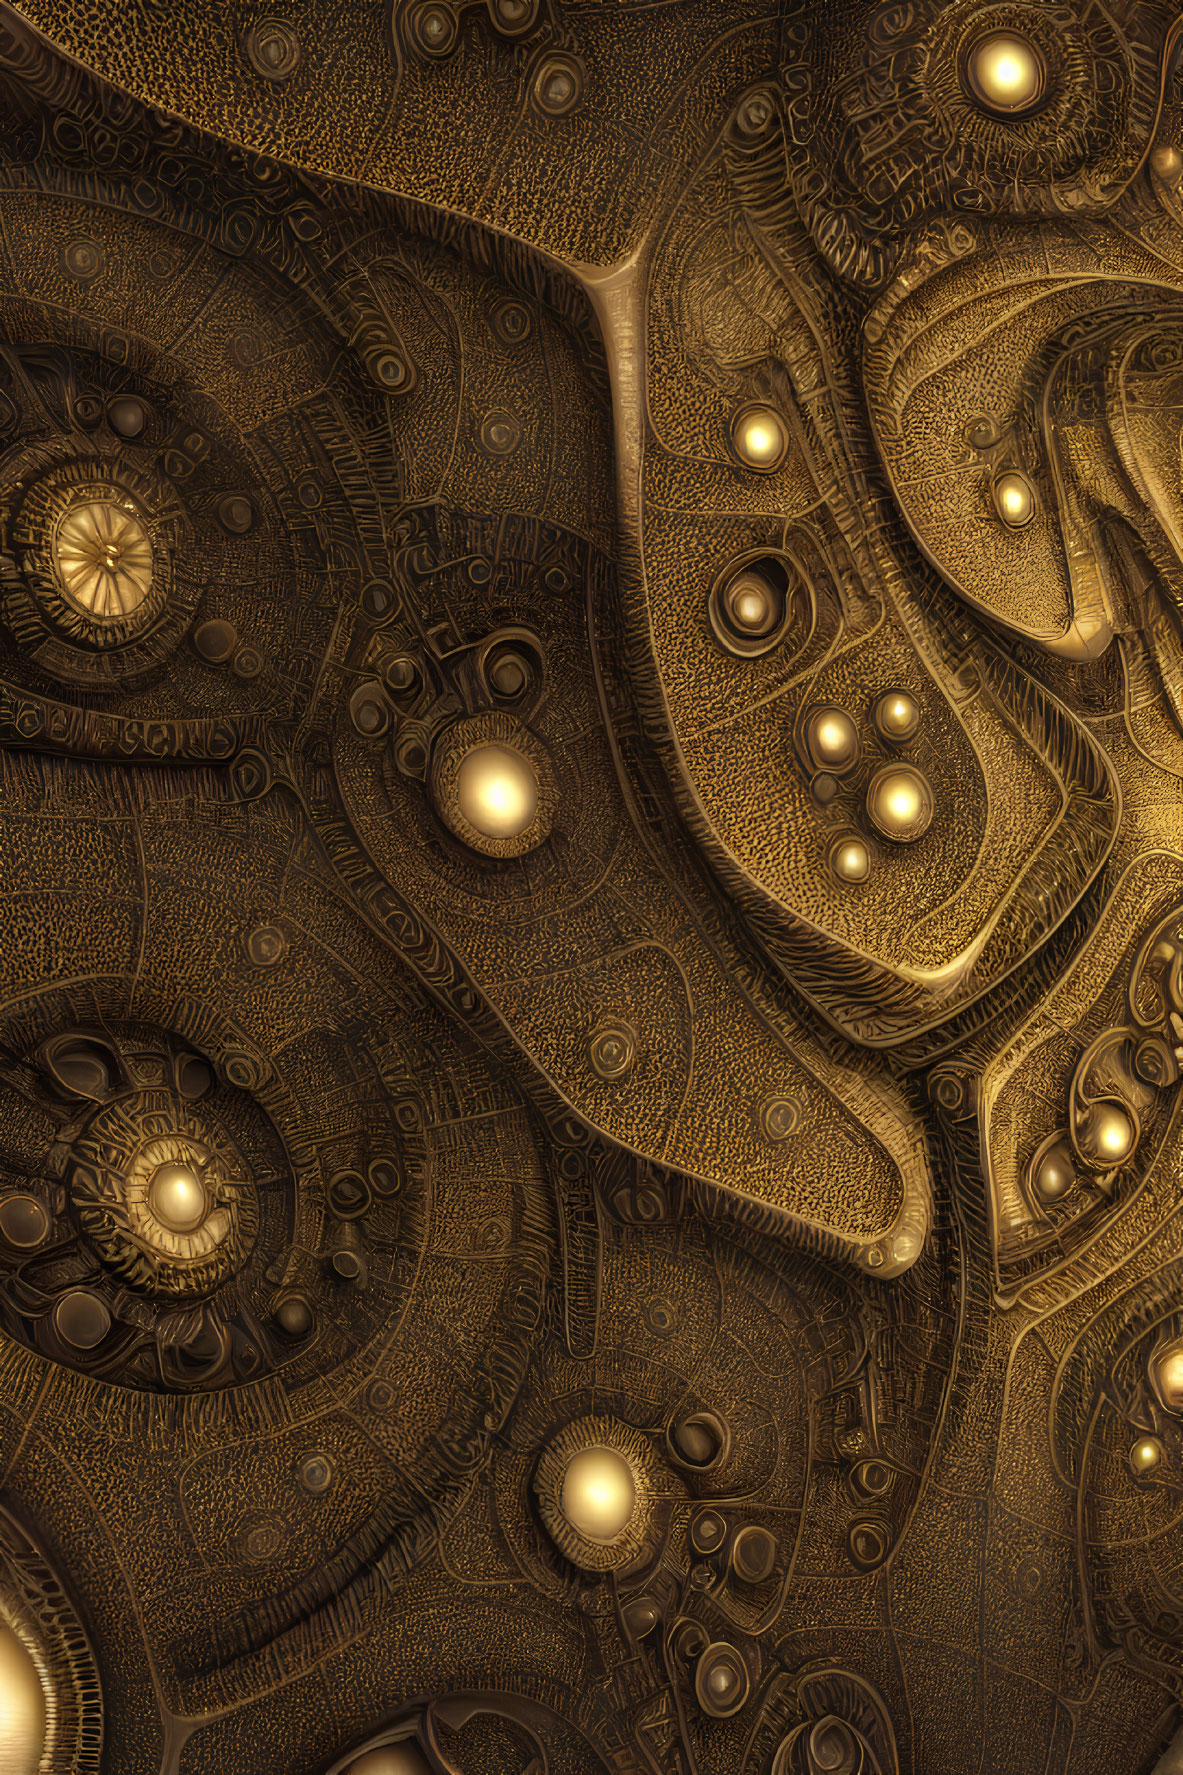 Detailed Golden Fractal Texture with Glowing Orbs and Intricate Patterns